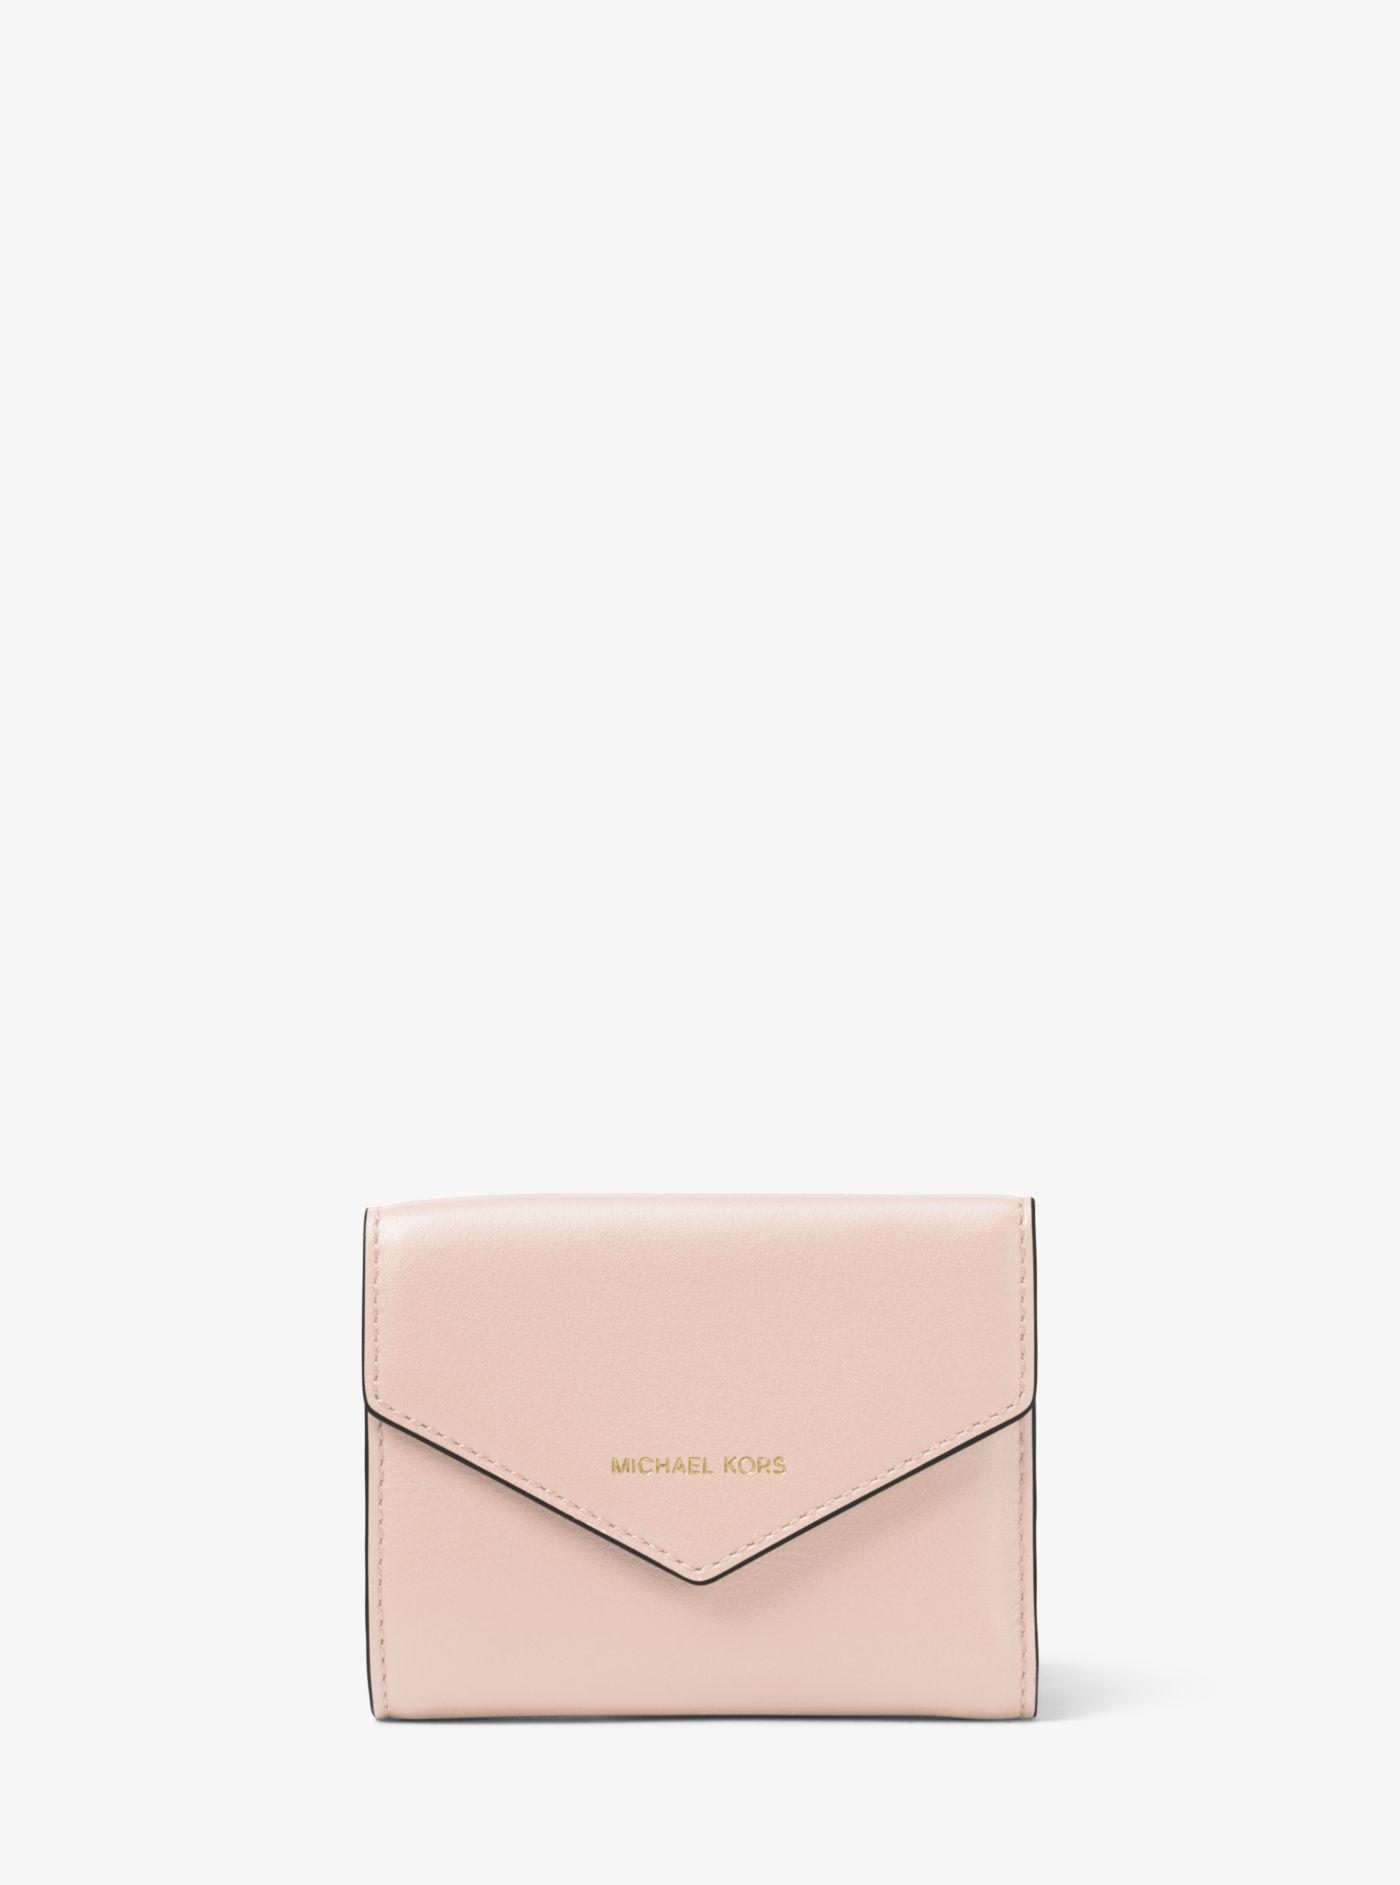 Michael Kors Women's Pink Small Leather Envelope Wallet